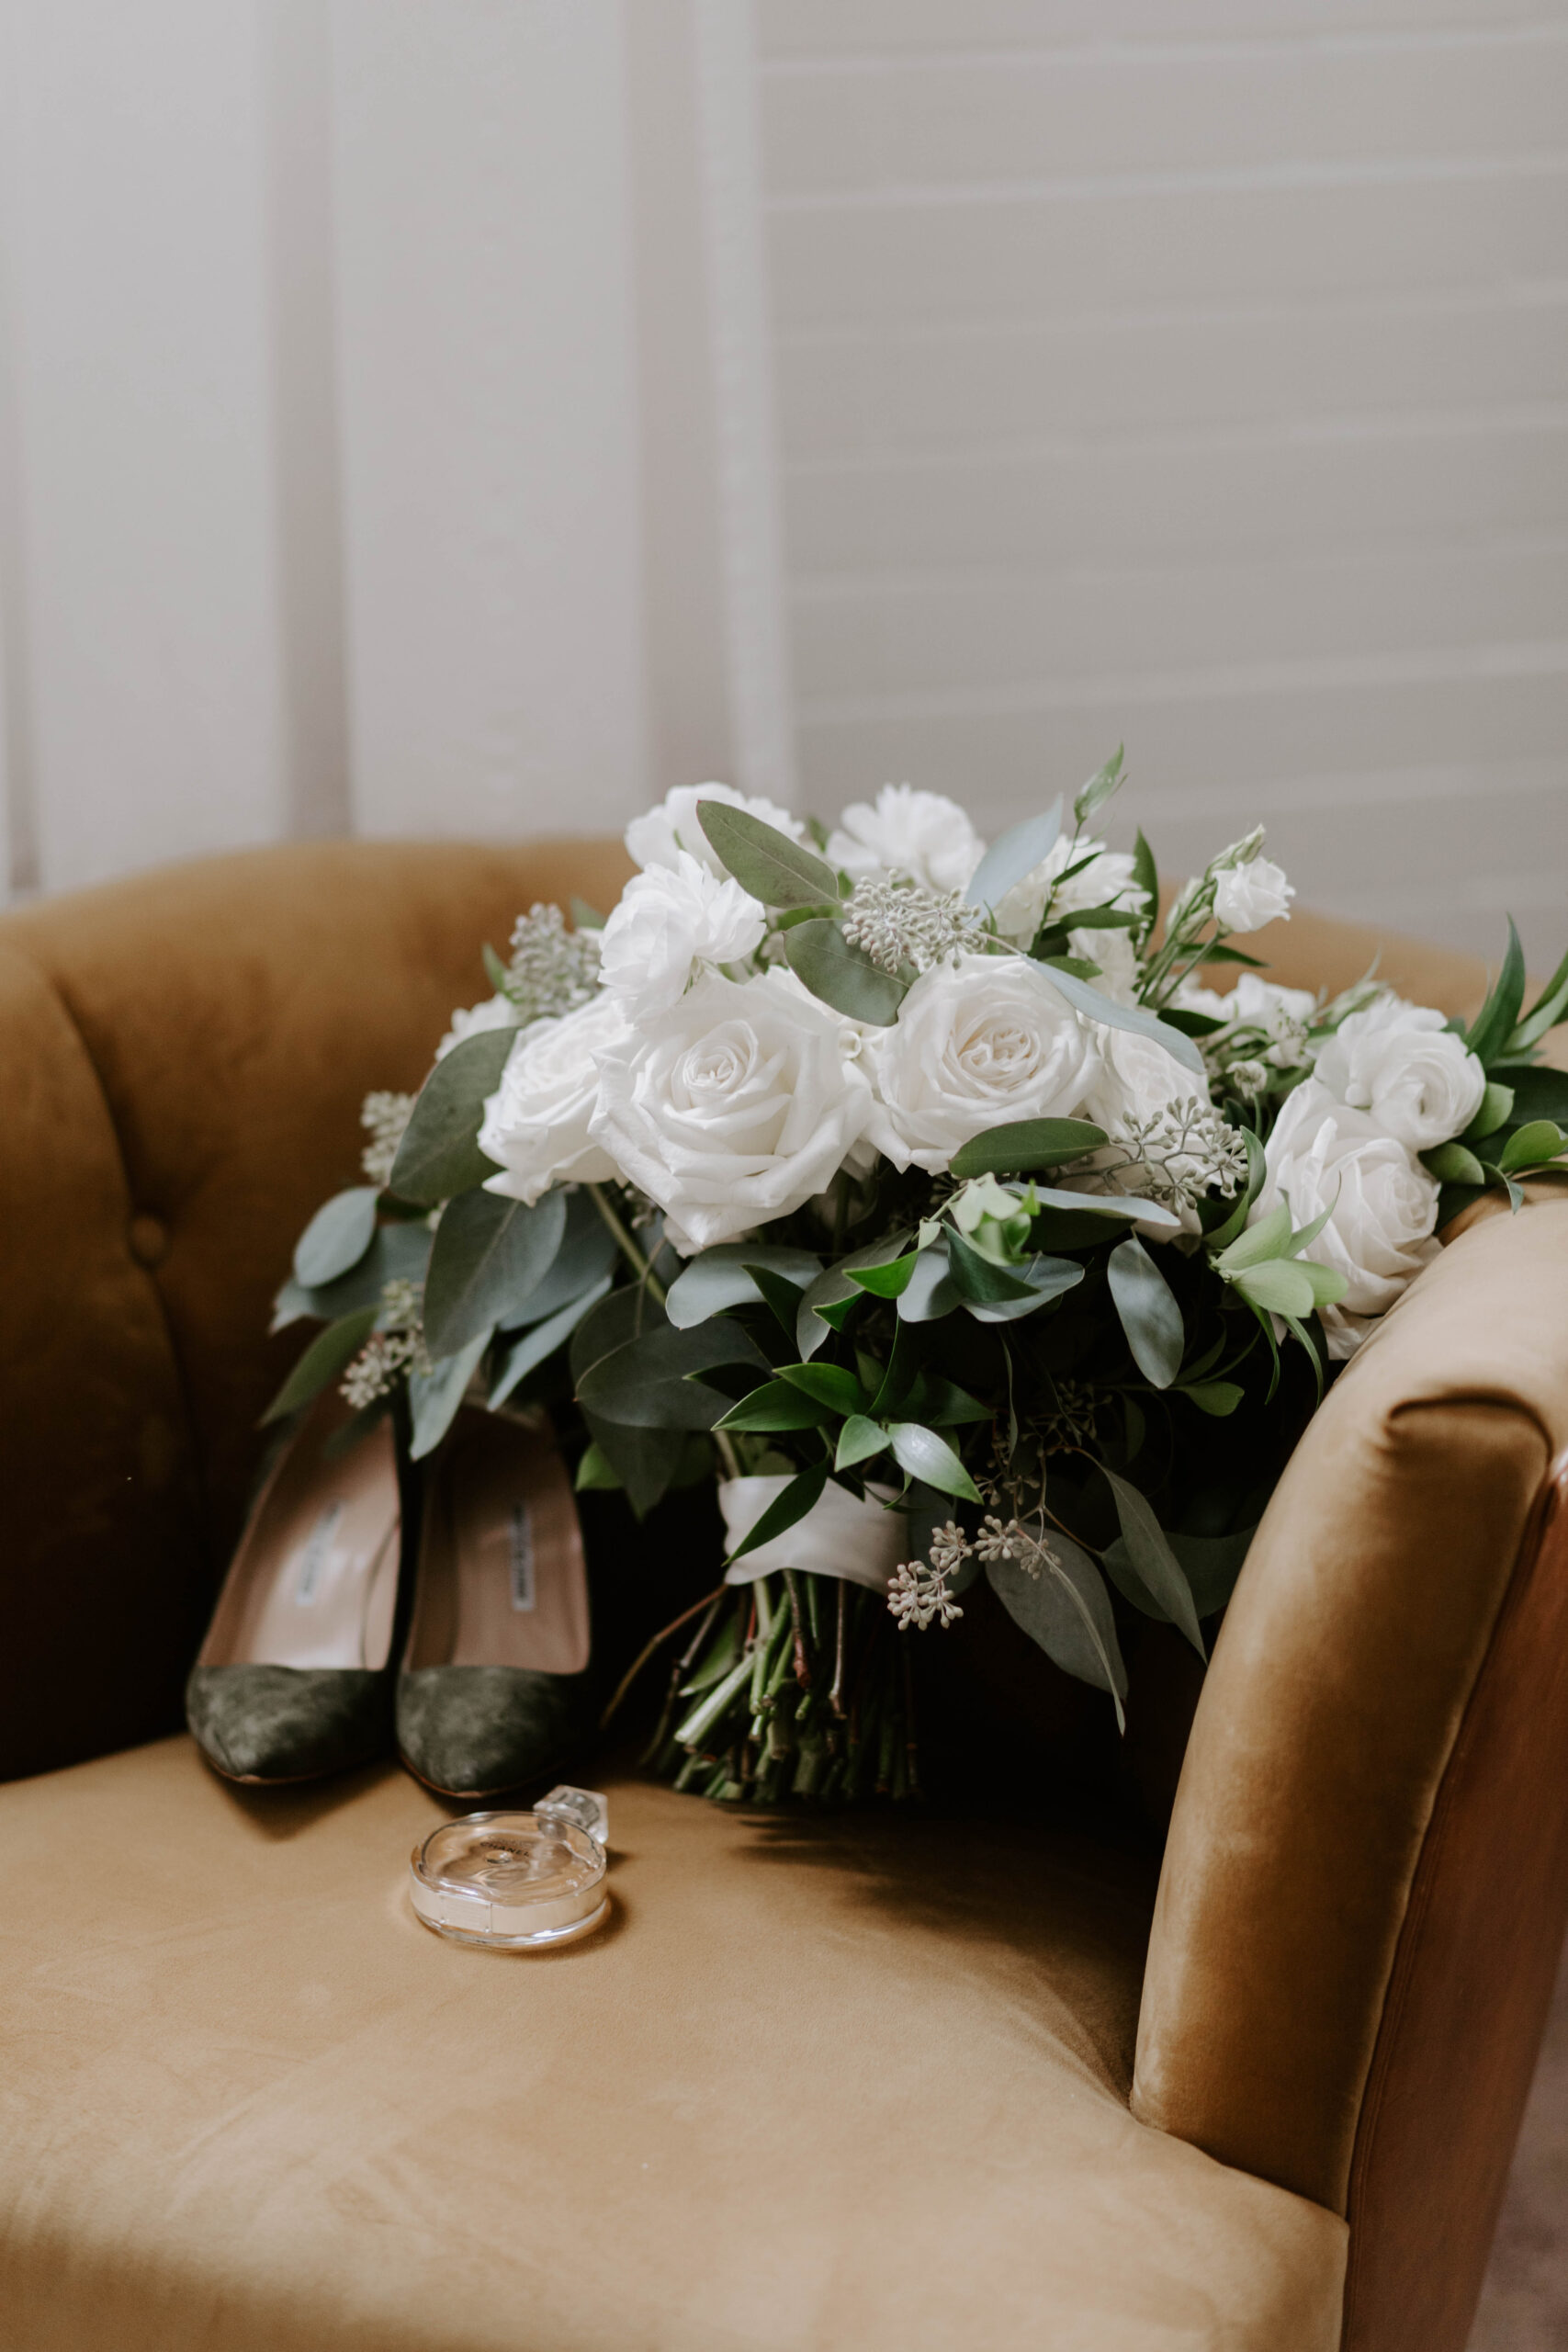 A beautiful wedding bouquet of write roses with greenery, paired with gorgeous mossy green shoes on a velvet chair